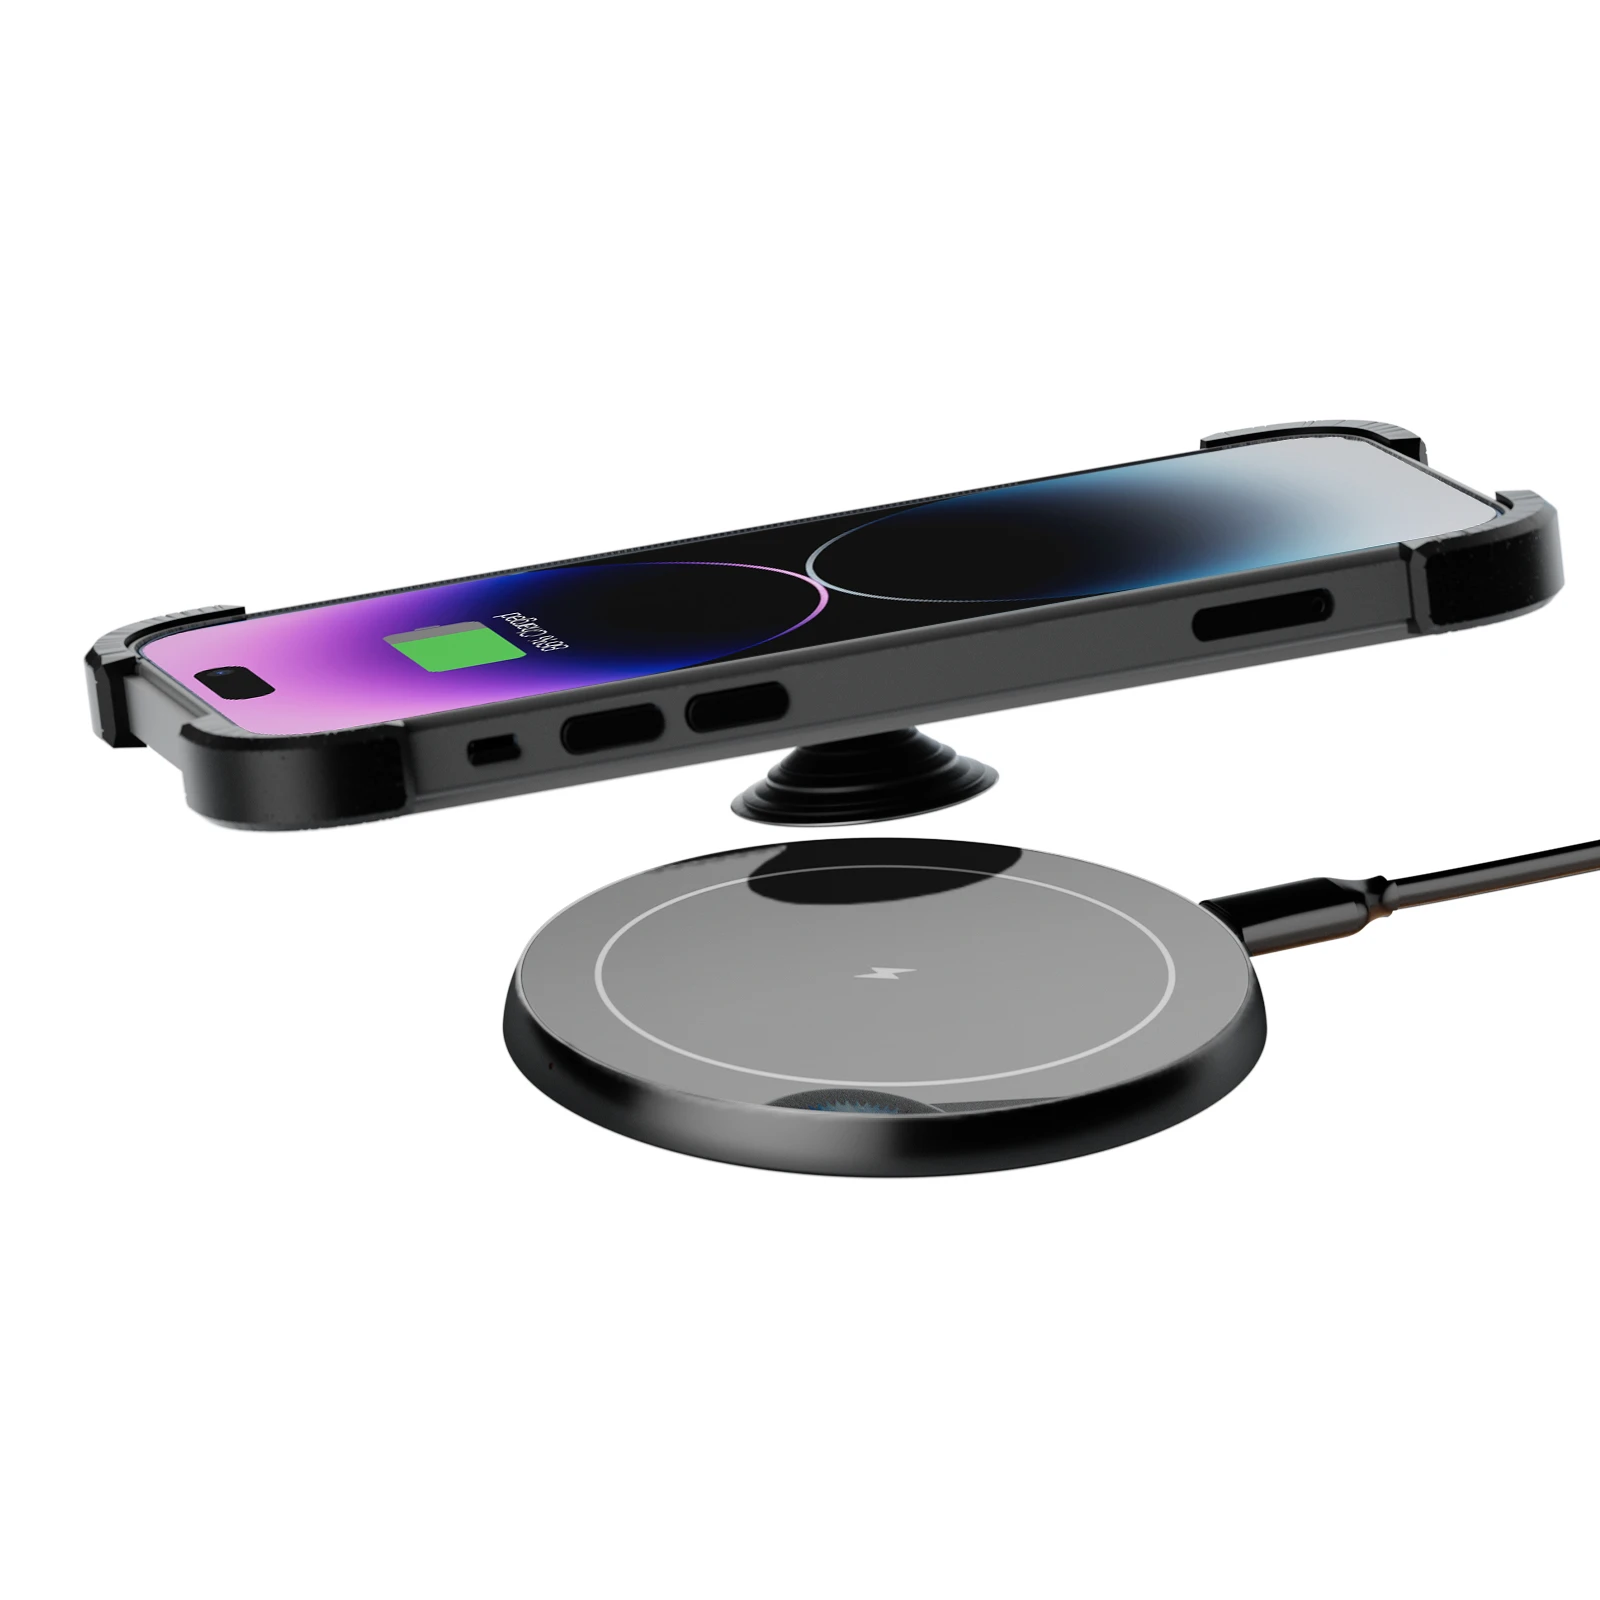 Wireless Charge Popsocket | Otterbox Cases Popsockets Pop Socket Wireless Charger Wireless Chargers -